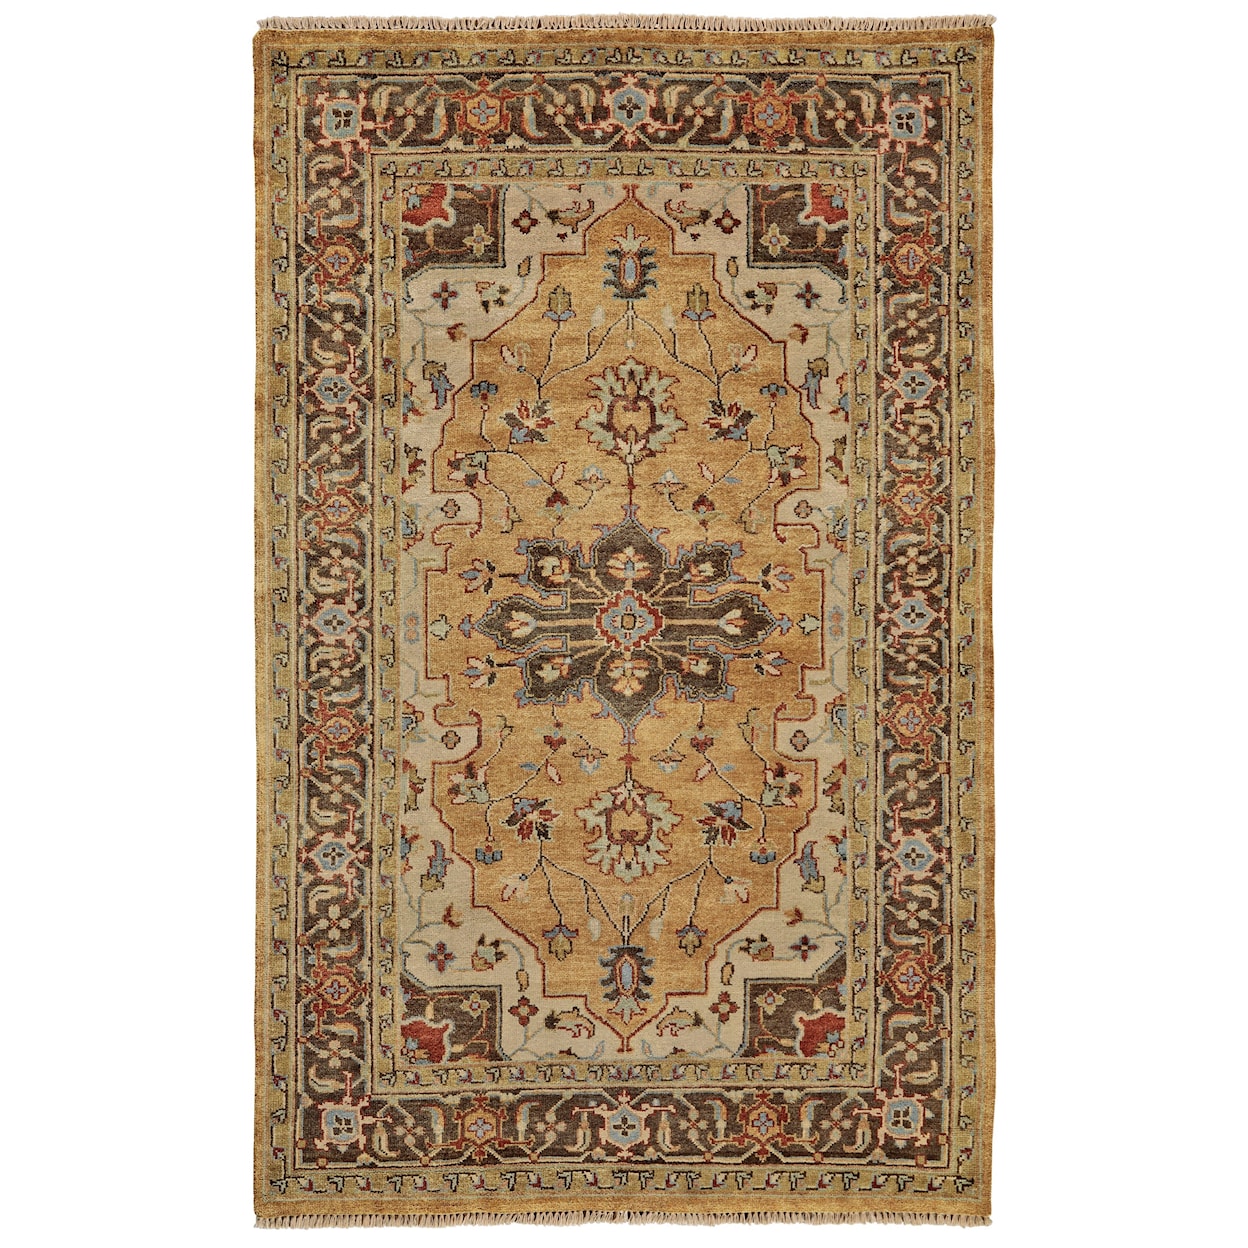 Feizy Rugs Ustad Gold/Brown 9'-6" x 13'-6" Area Rug